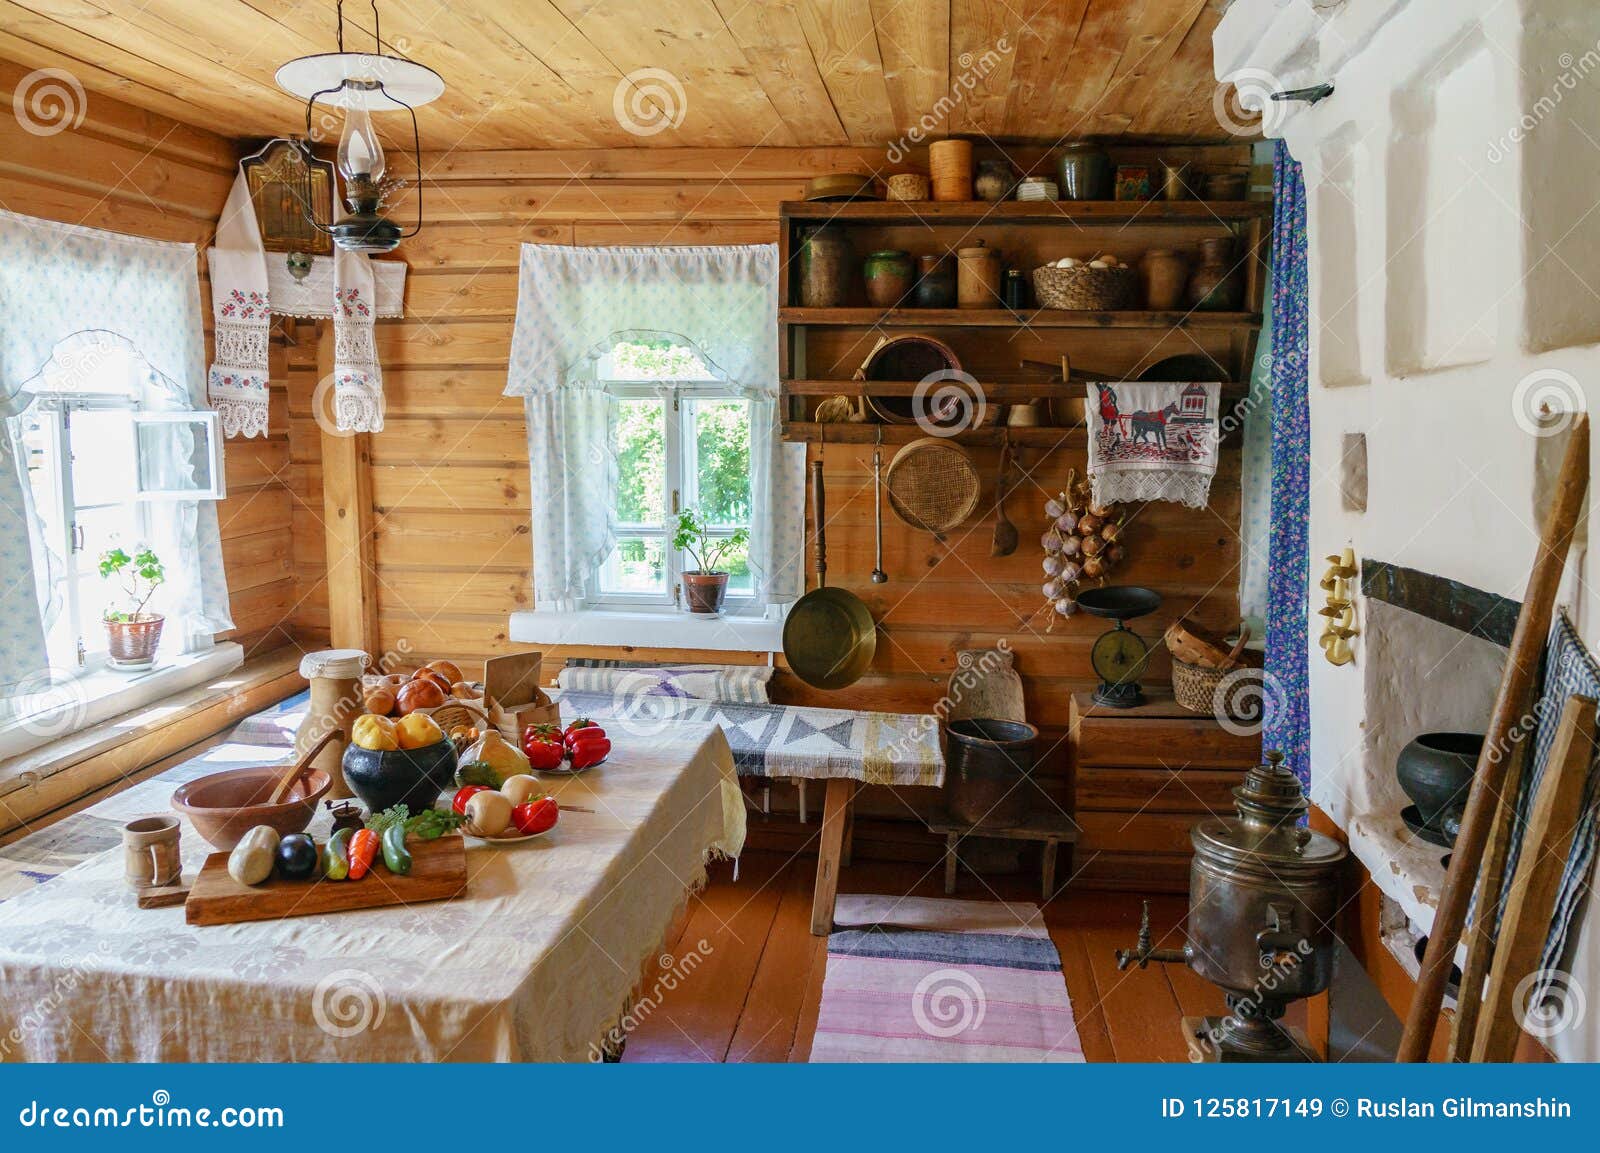 Traditional Russian Cottage With Oven And Crockery Interior